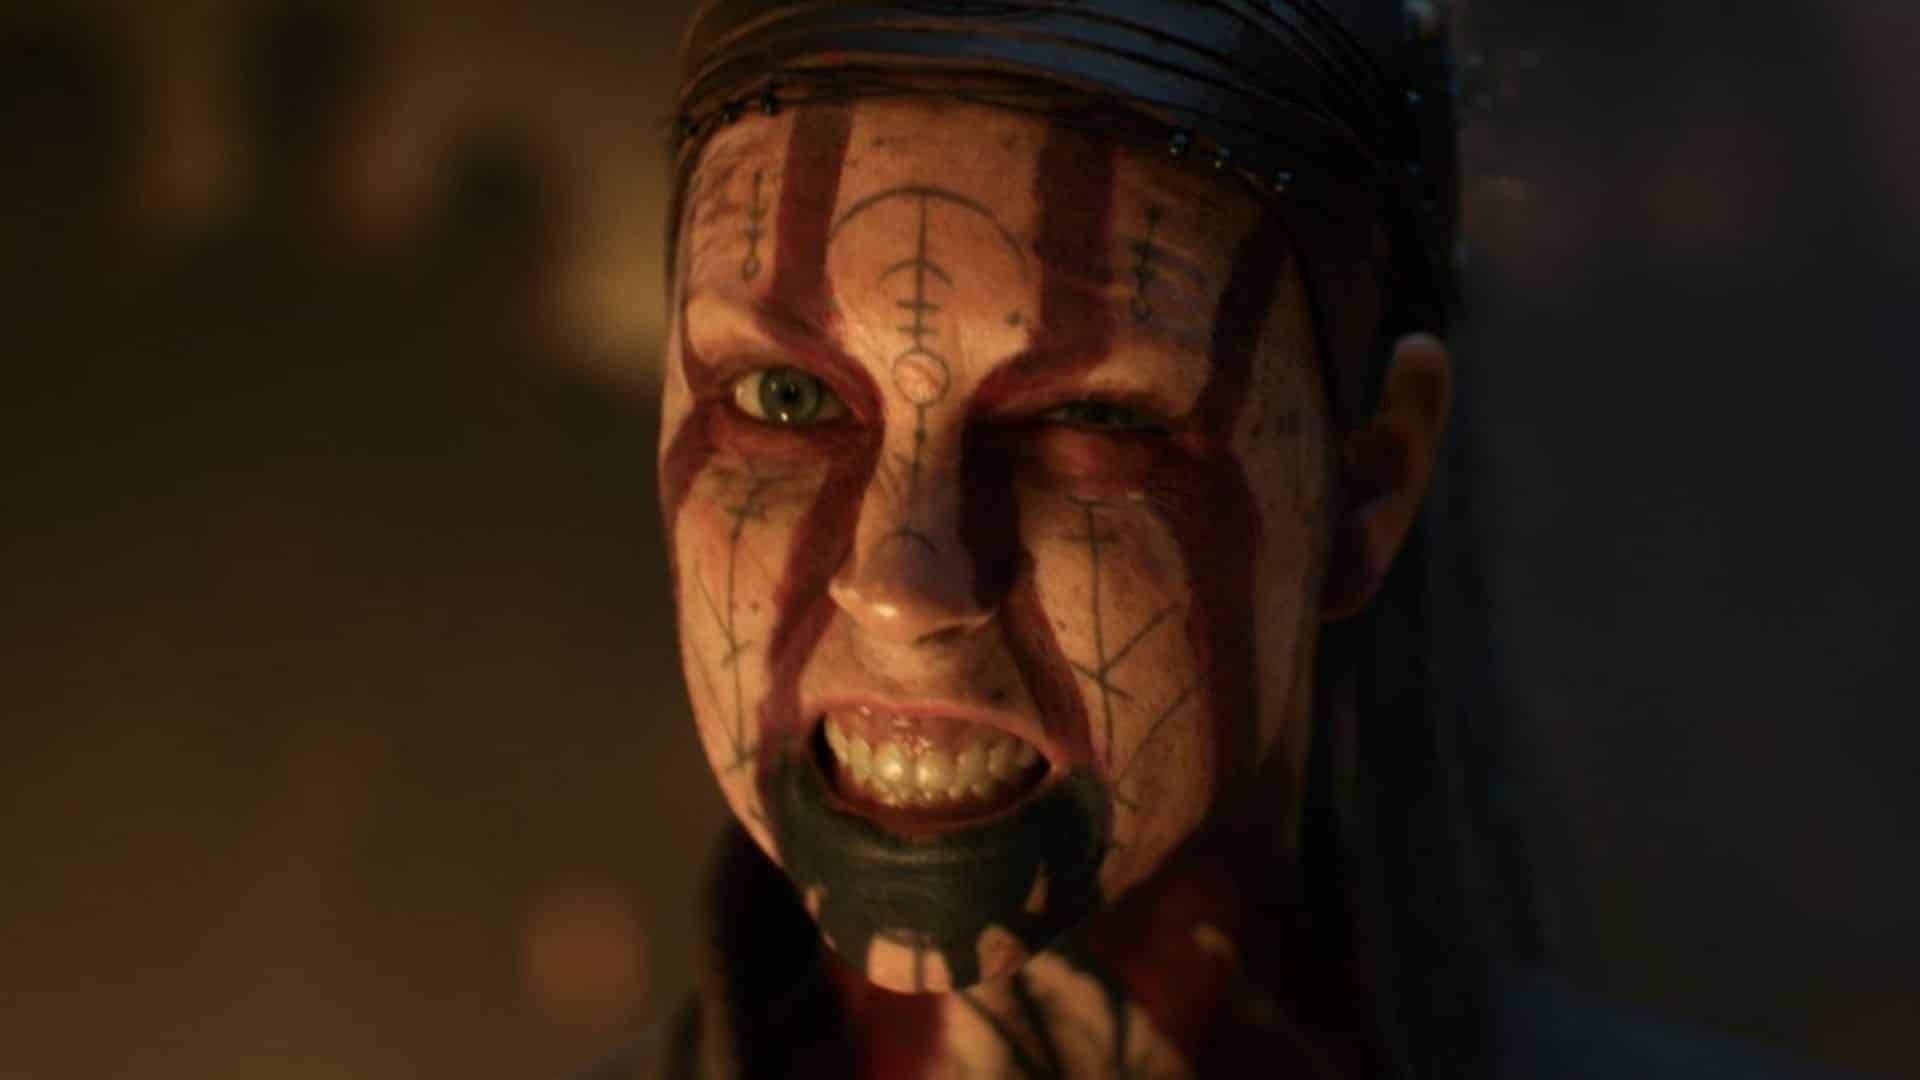 senua pulling an angry face in hellblade